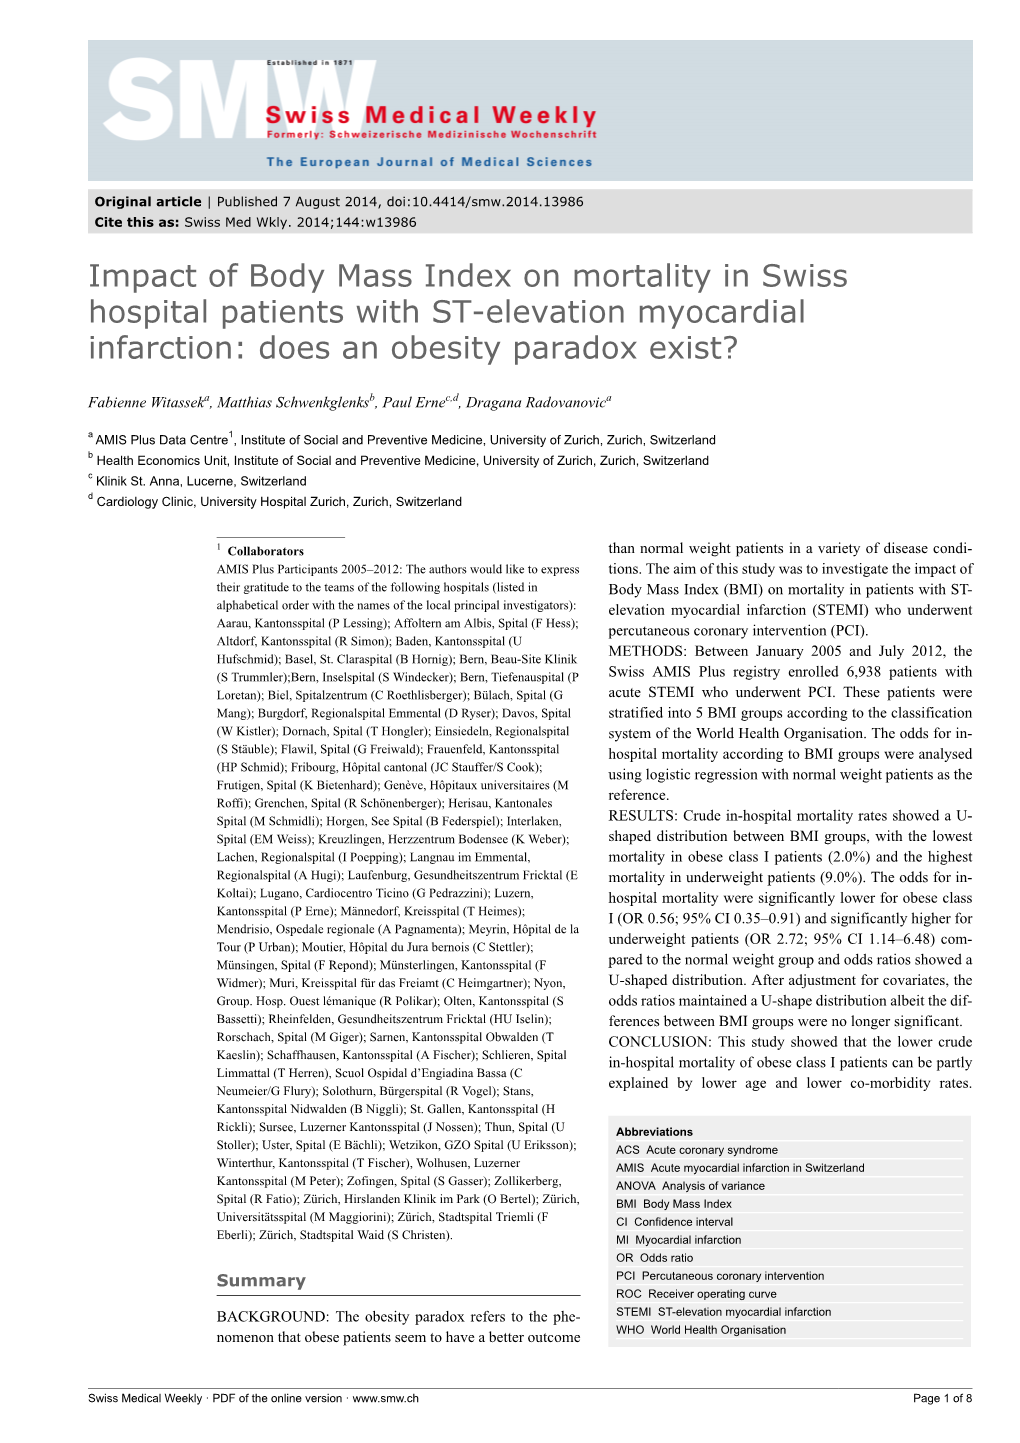 Impact of Body Mass Index on Mortality in Swiss Hospital Patients with ST-Elevation Myocardial Infarction: Does an Obesity Paradox Exist?